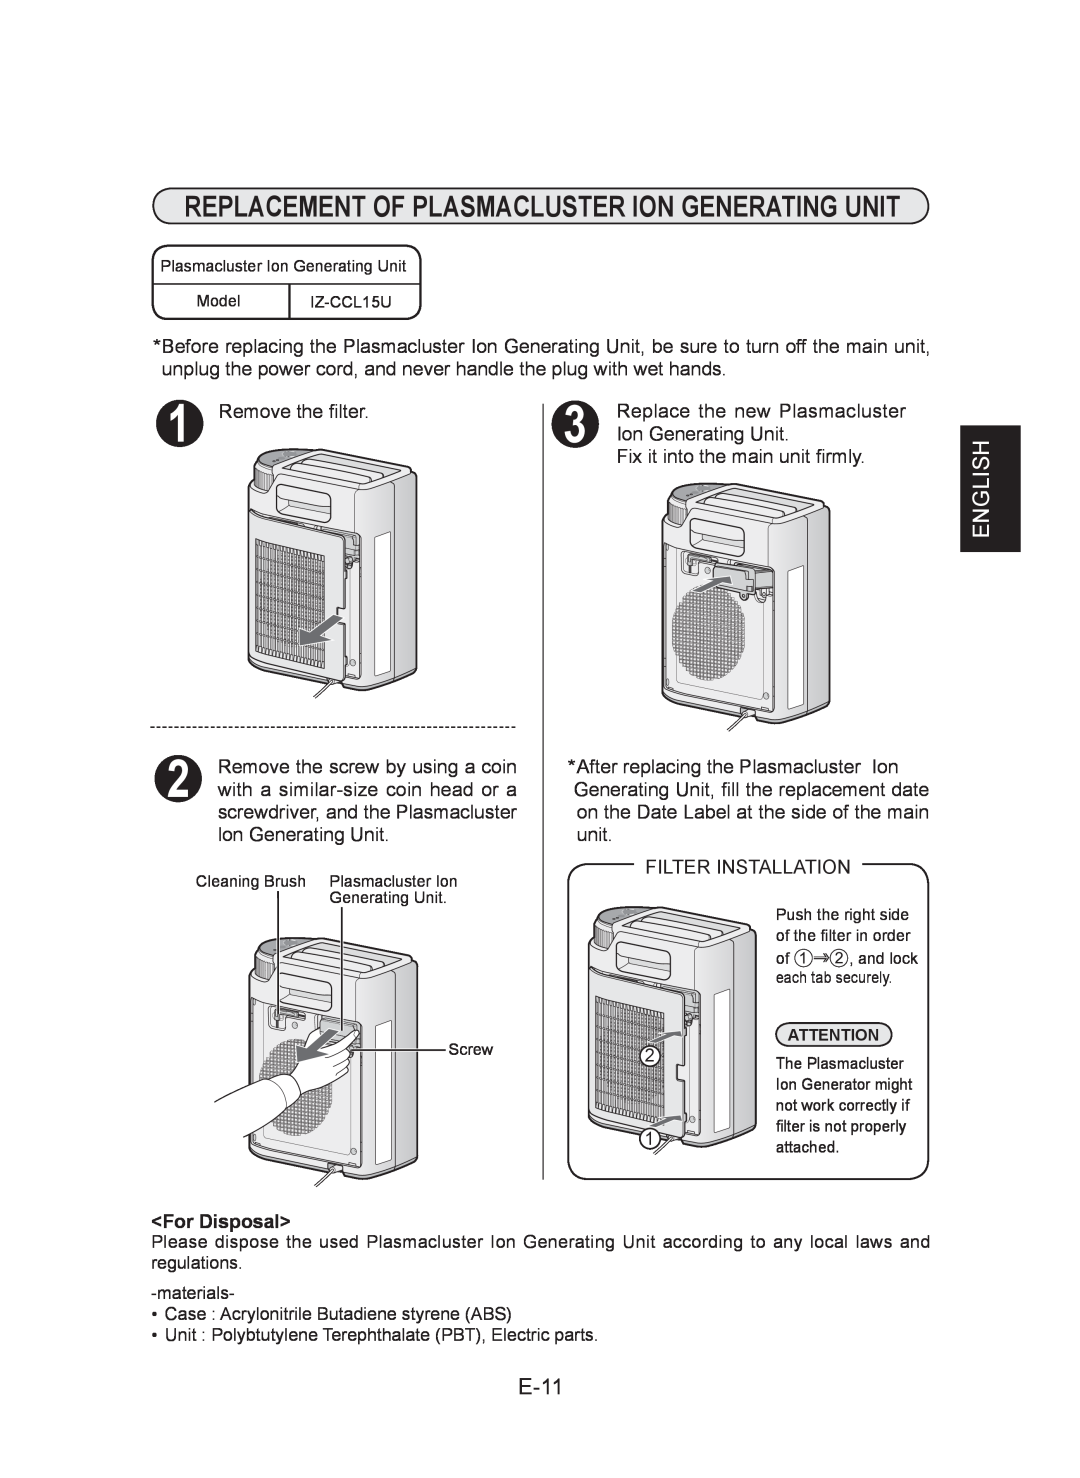 Sharp IG-CL15U operation manual Replacement Of Plasmacluster Ion Generating Unit, English, E- 